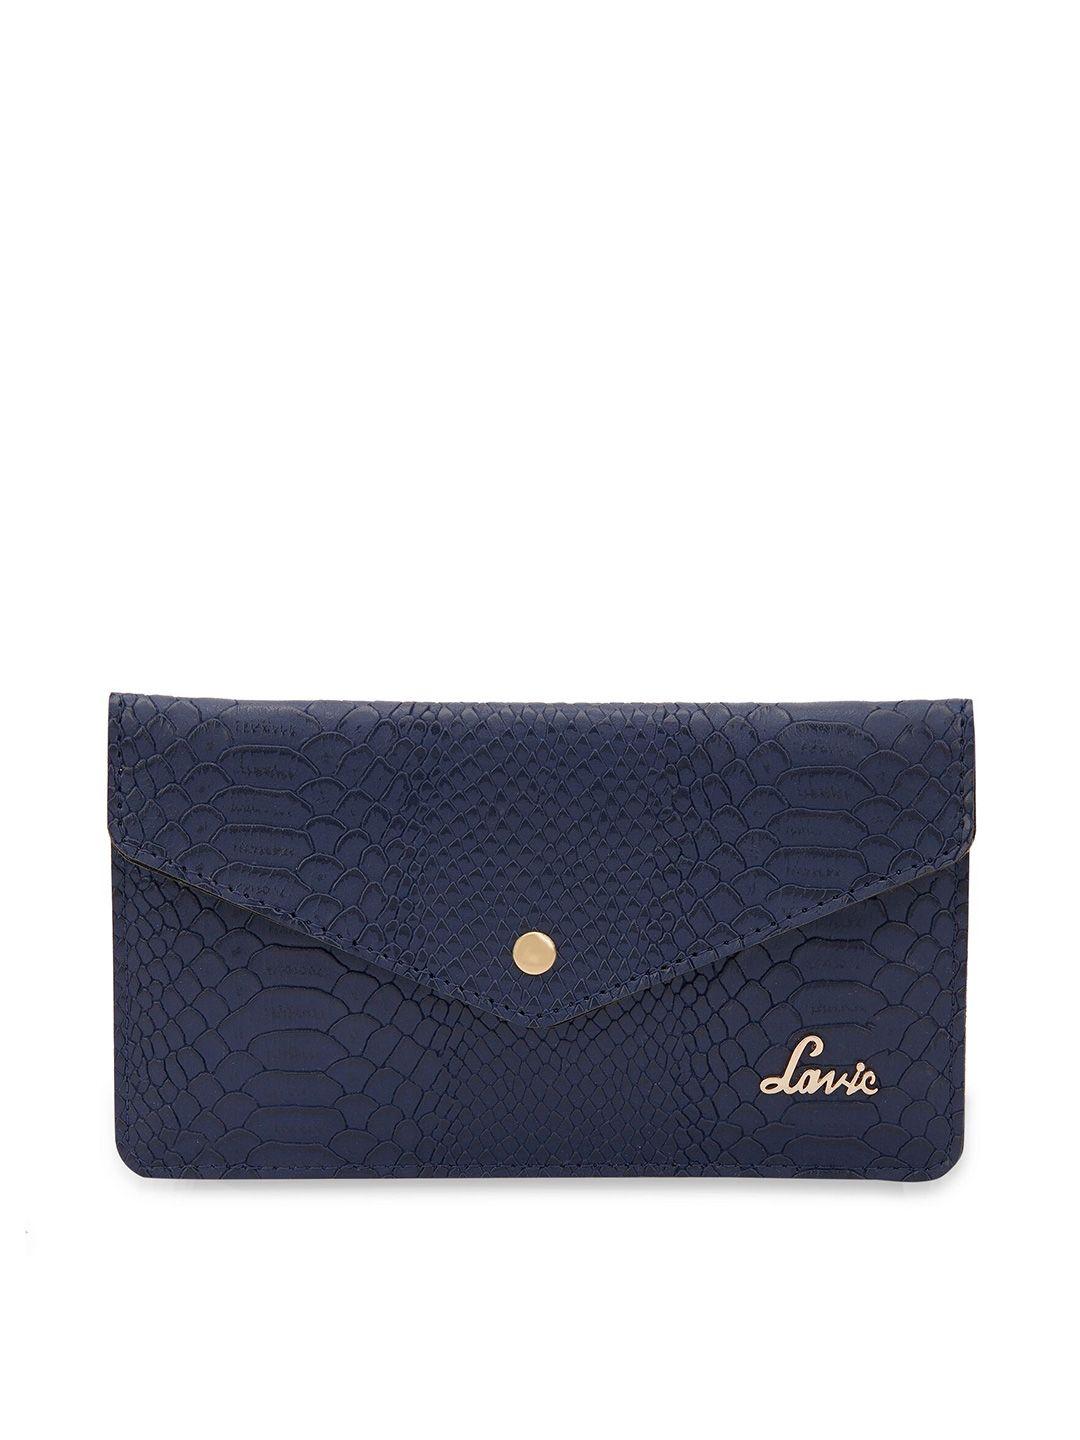 lavie-women-textured-synthetic-leather-envelope